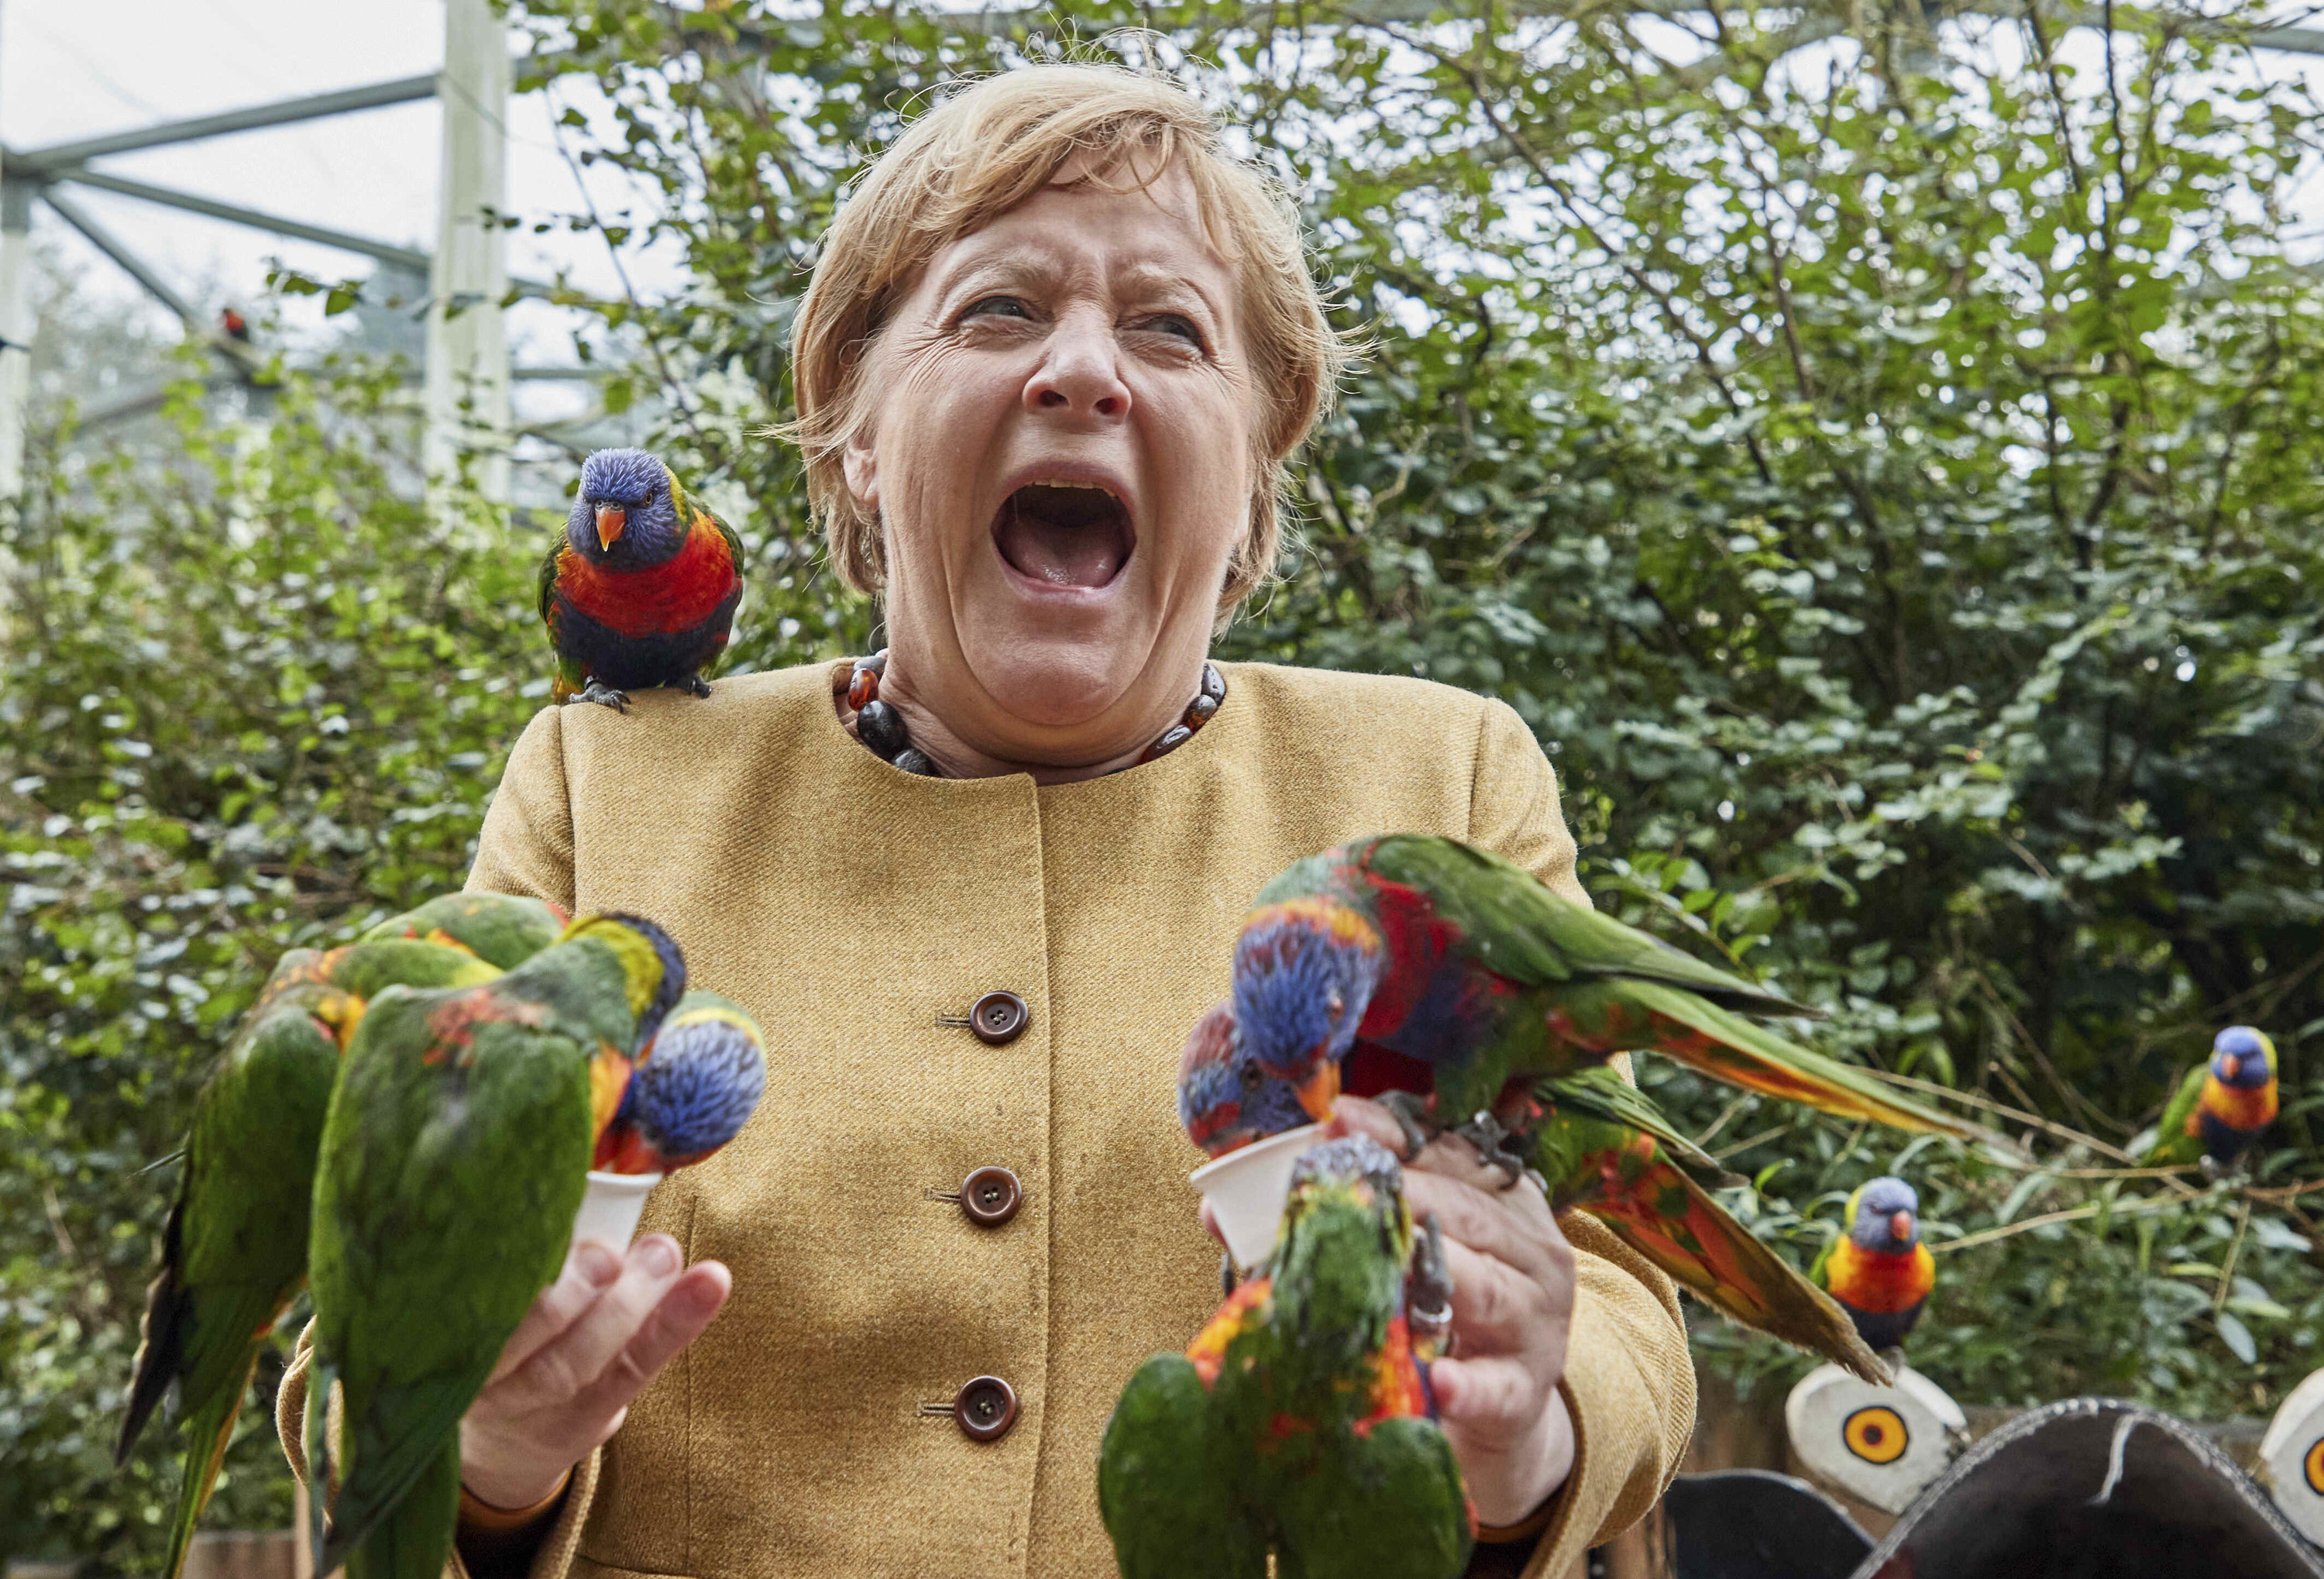 Merkel screams in agony as the birds swamp her and bite her hands